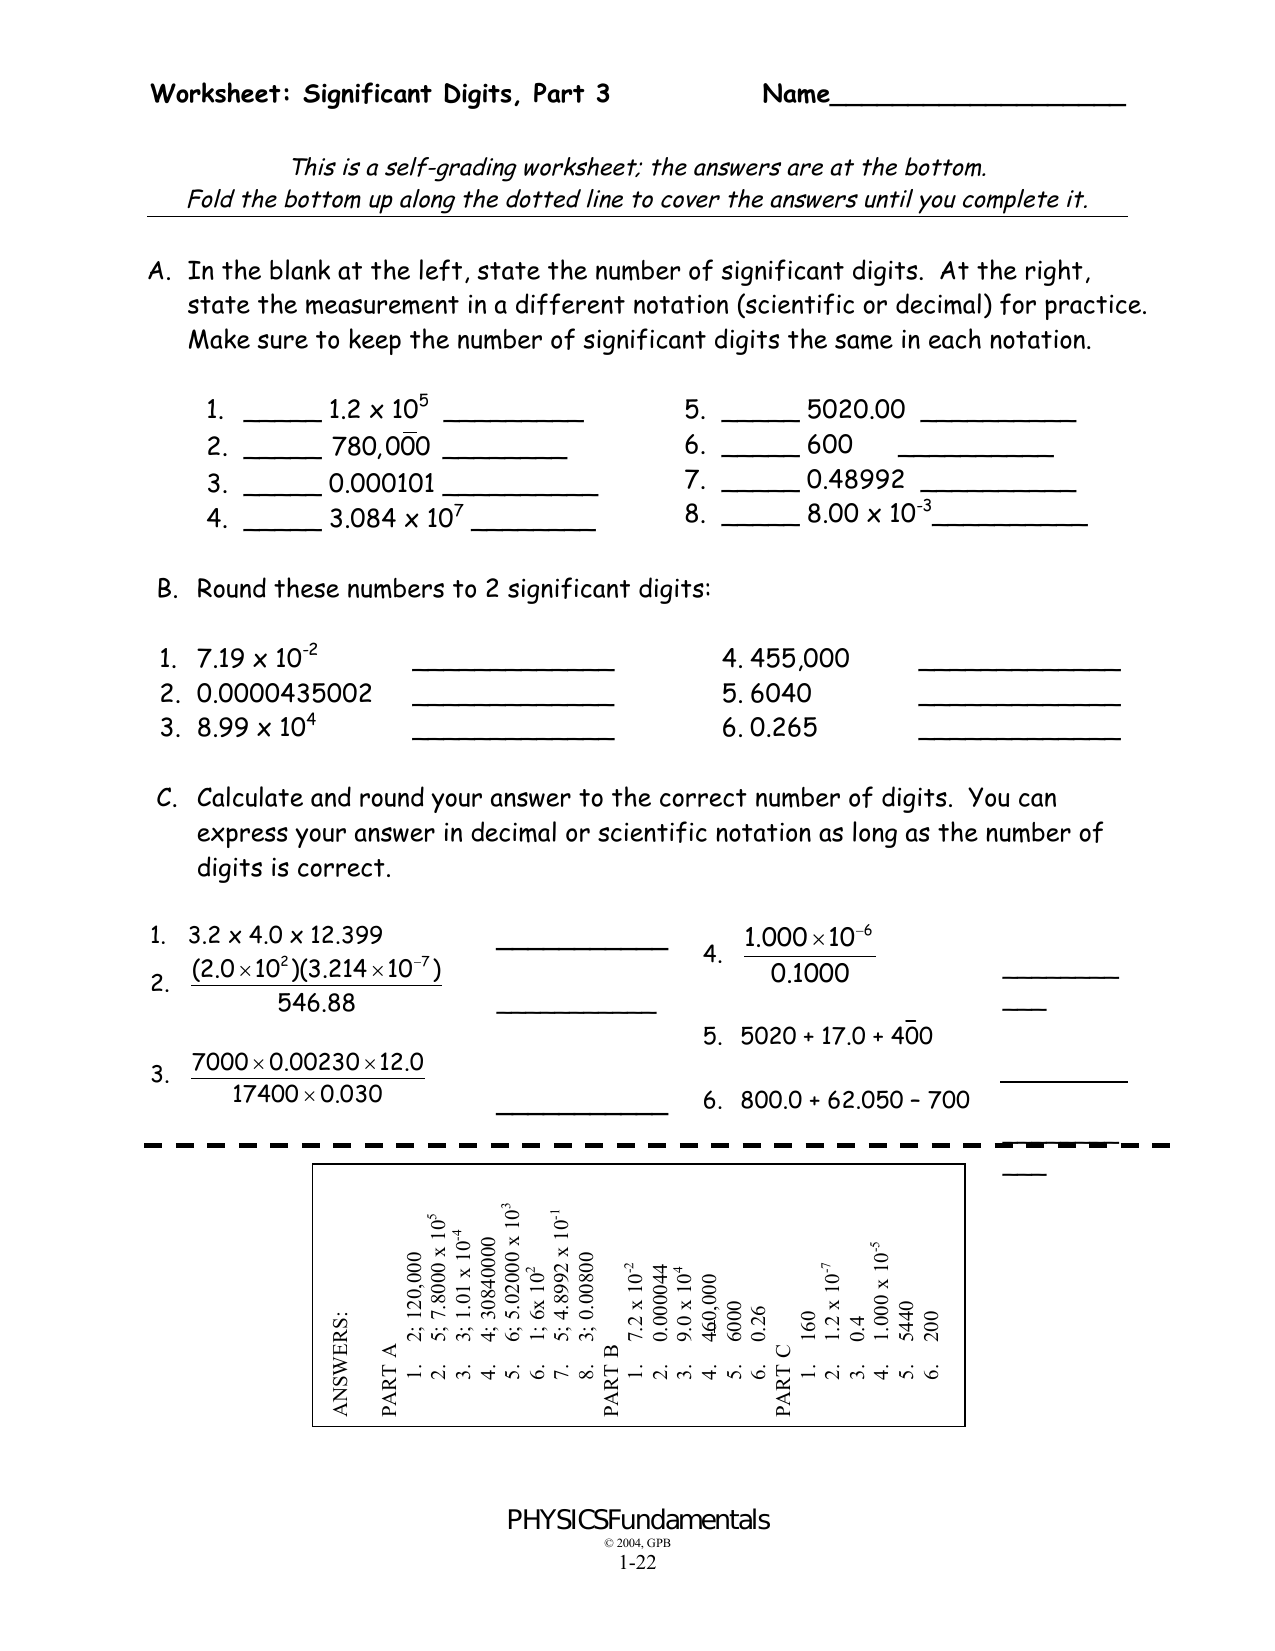 20-20 -Significant Digits Wks 20 For Significant Figures Worksheet Chemistry